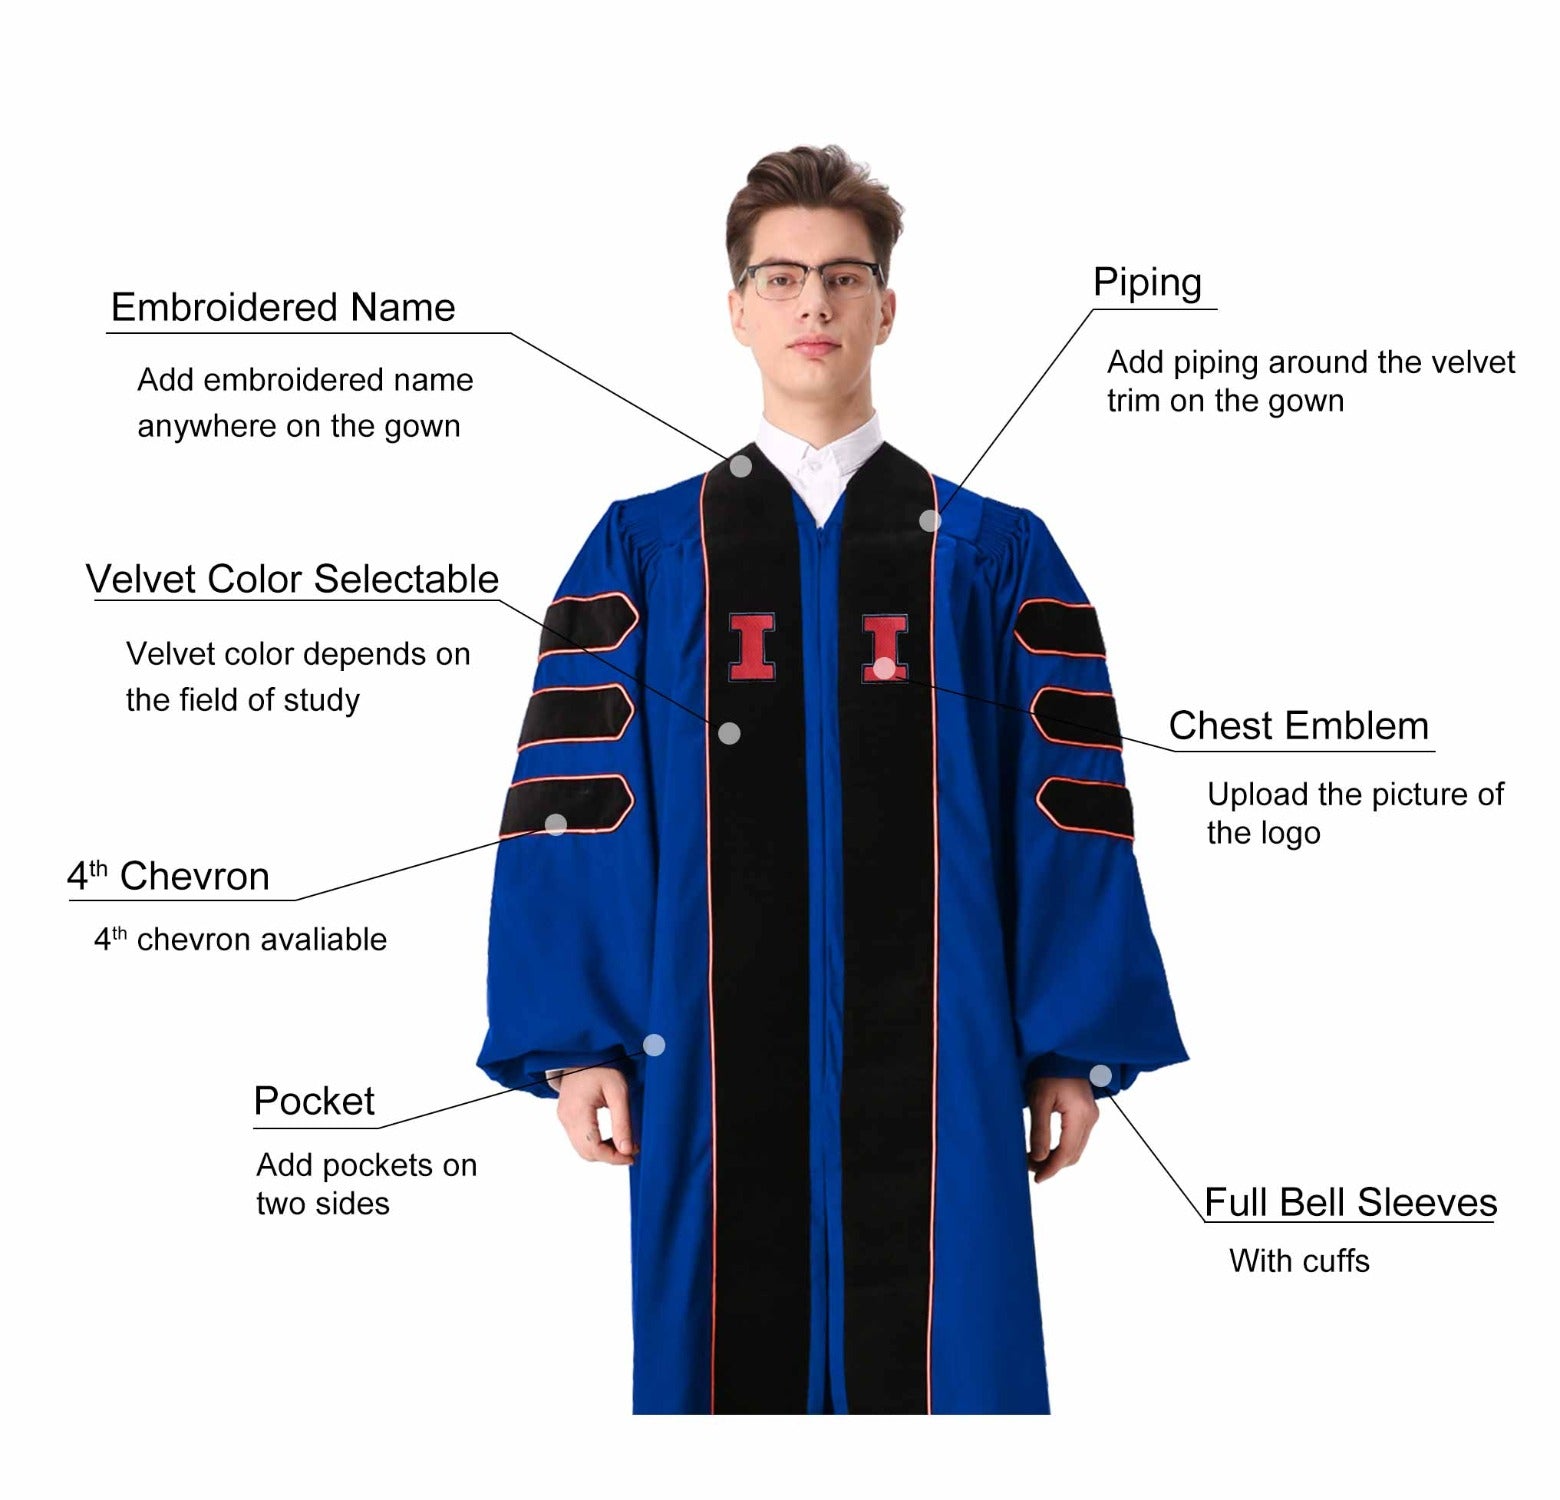 How to wear your academic dress | UNE Life